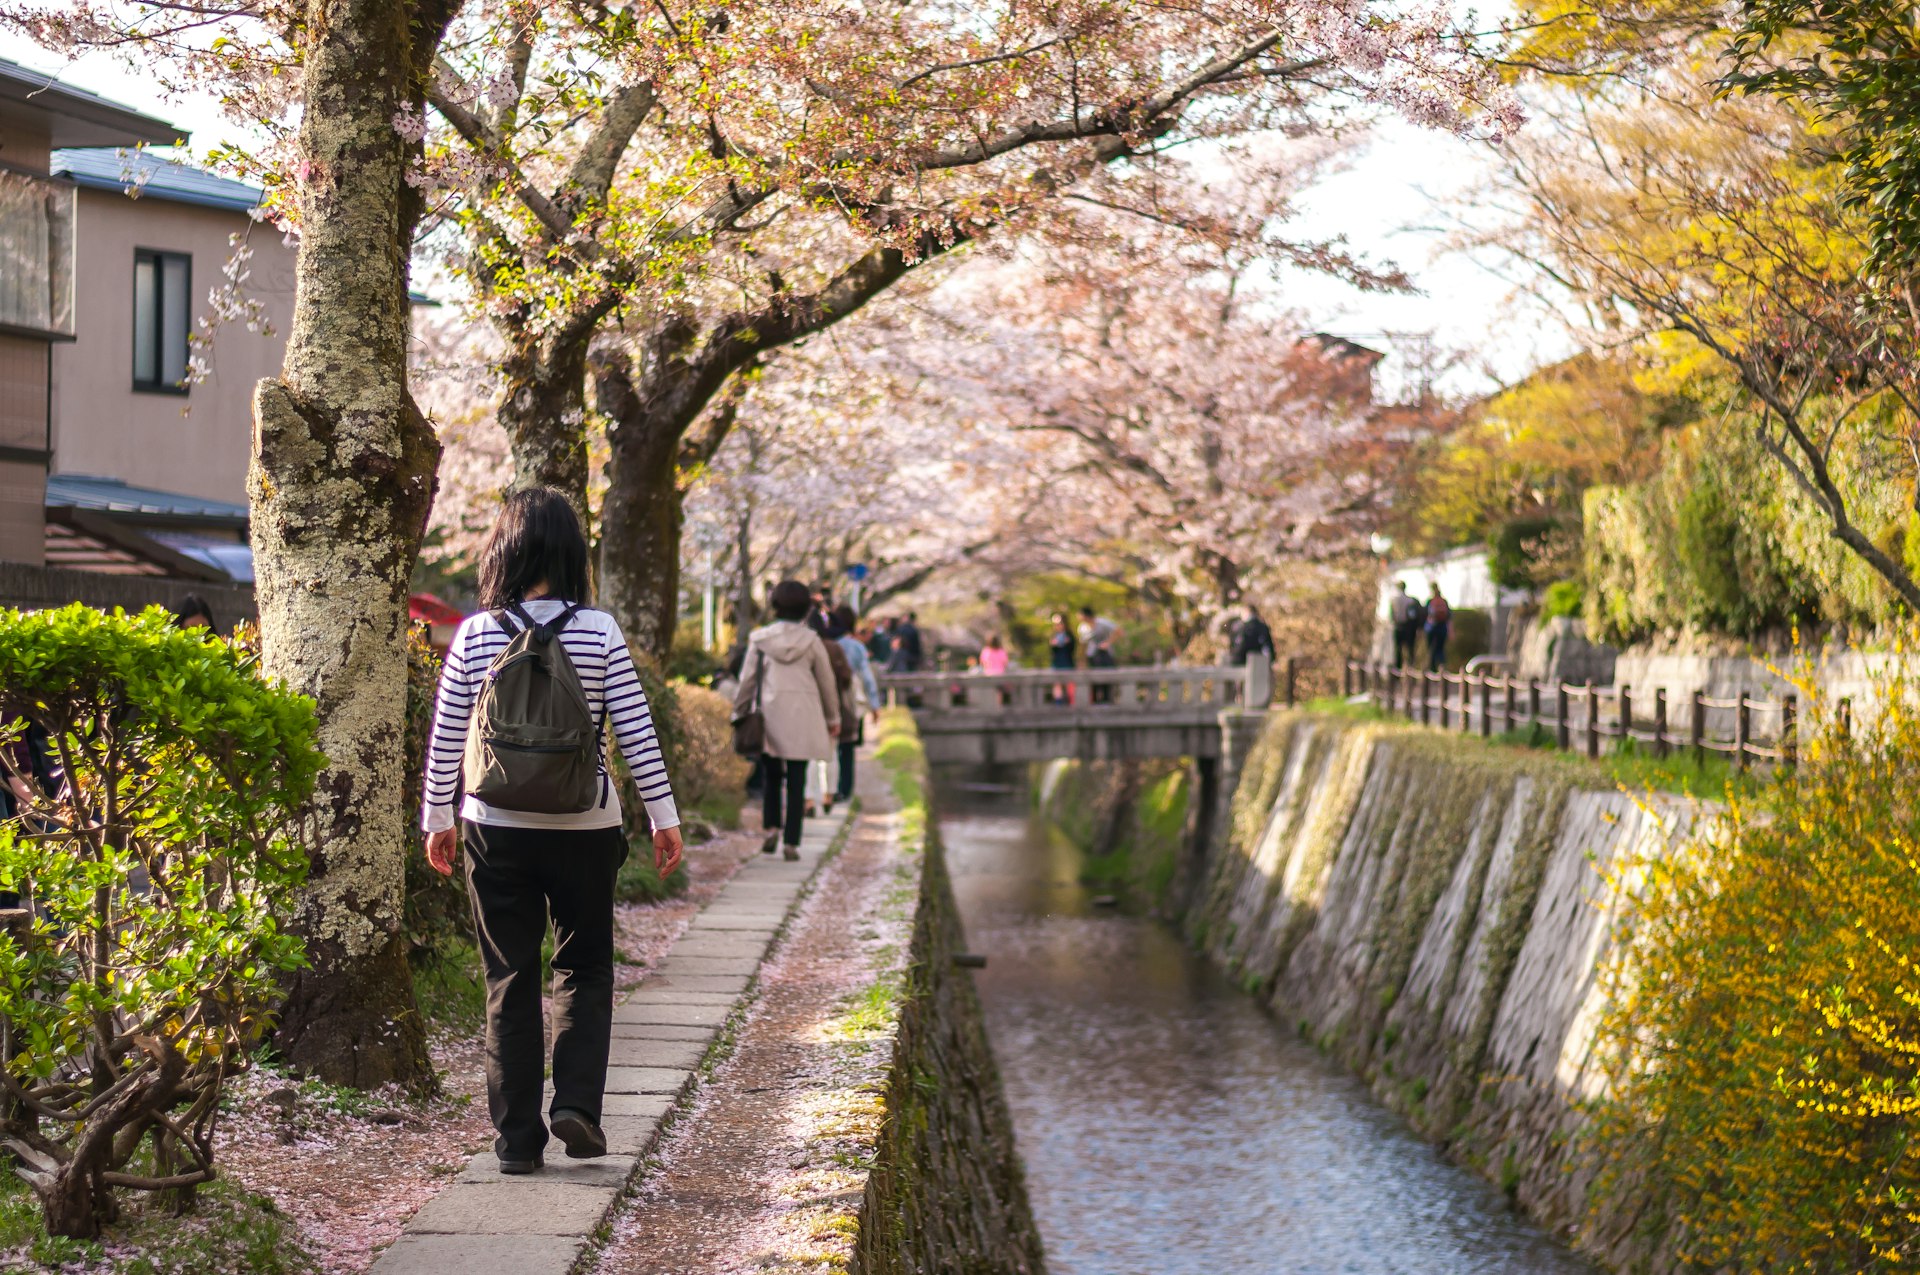 'The Path of Philosophy' (Tetsugaku no michi), which is a well-known riverside cherry blossom area.